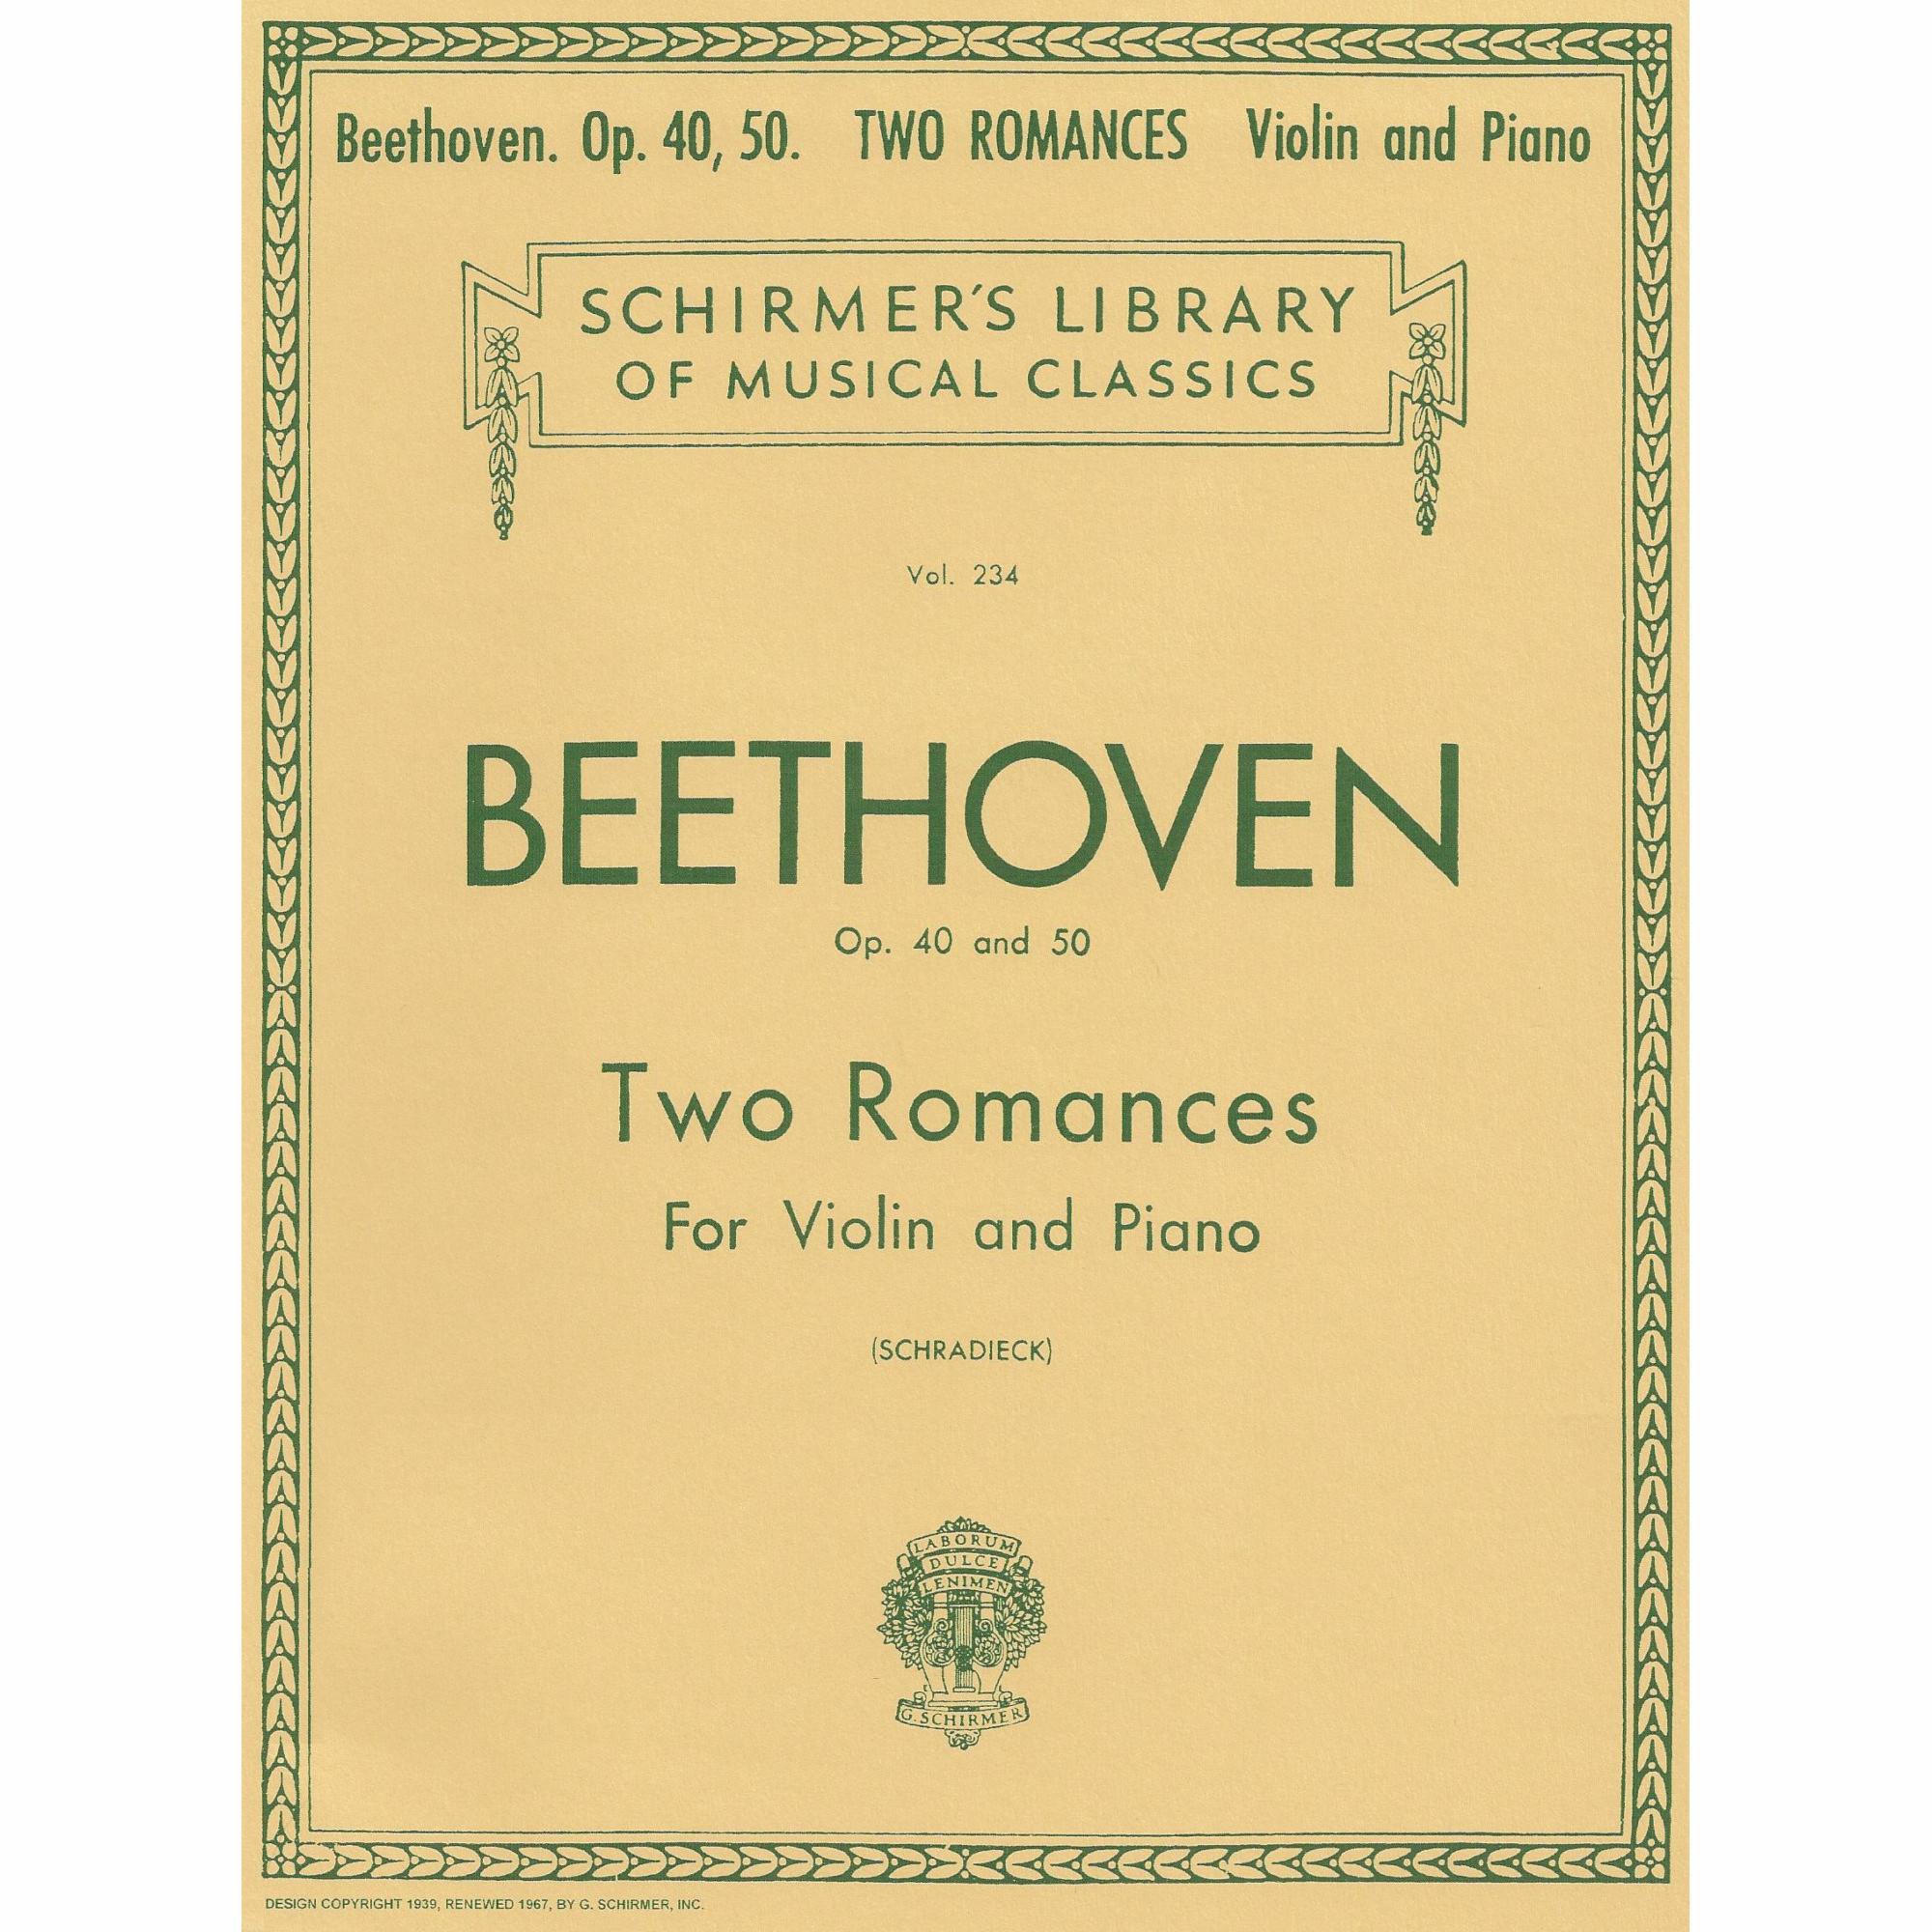 Beethoven -- Two Romances, Op. 40 & 50 for Violin and Piano